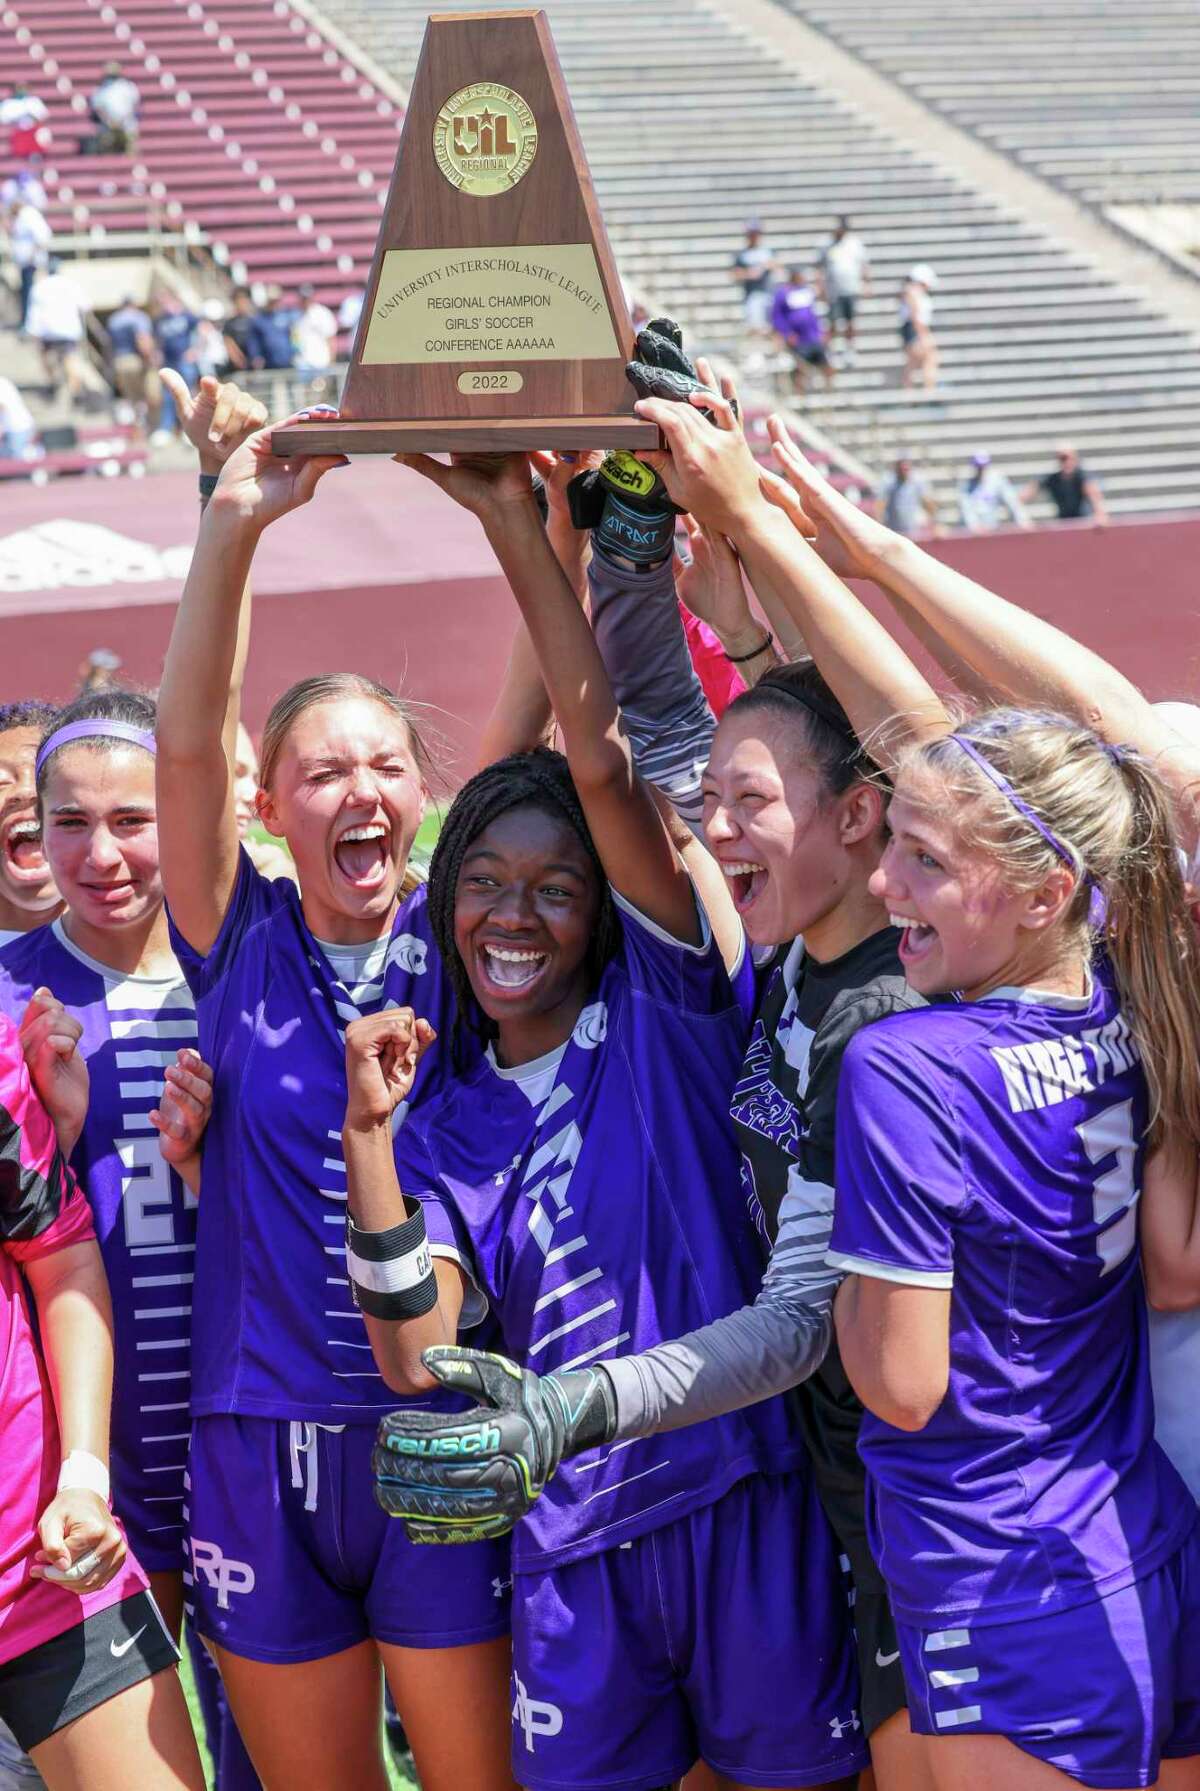 Ridge Point Panthers Lauren Walker (13) and teammates celebrate after they defeated the Stratford Spartans in double overtime in a Region III-6A girls finals playoff soccer game on April 9, 2022 at Abshire Stadium in Deer Park, TX. Ridge Point Panthers won 2 to 0 in double overtime.